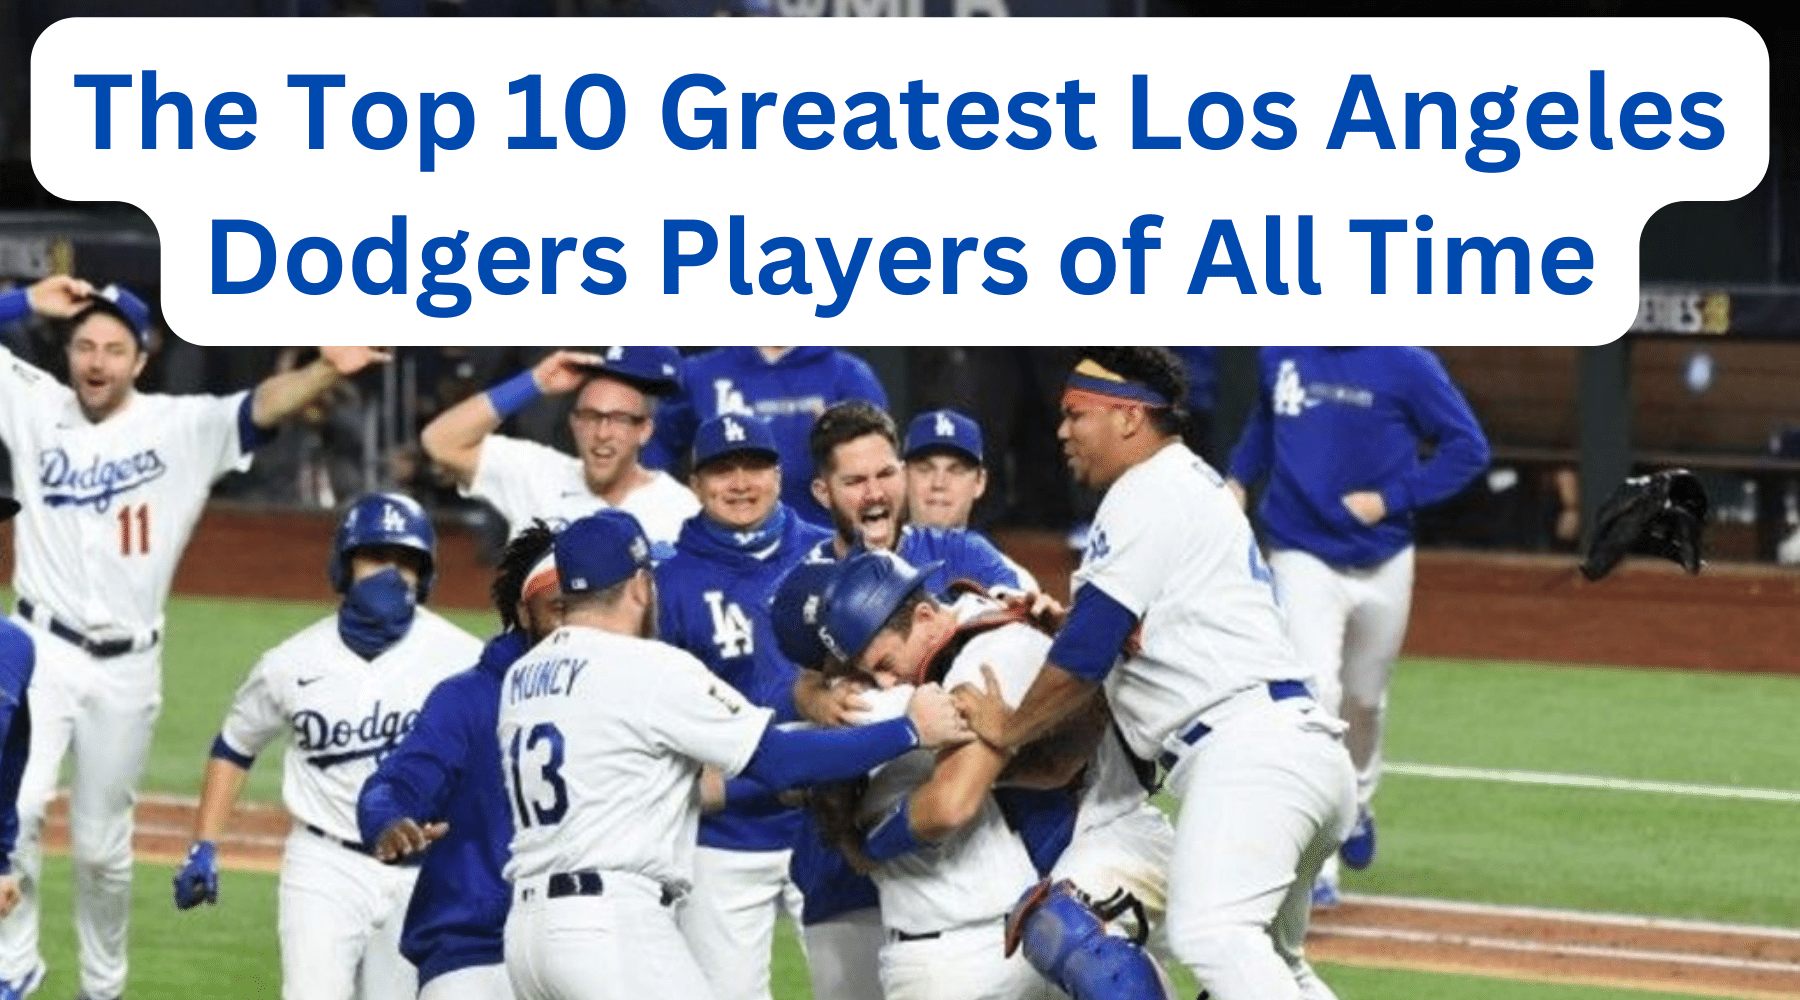 The Top 10 Greatest Los Angeles Dodgers Players of All Time